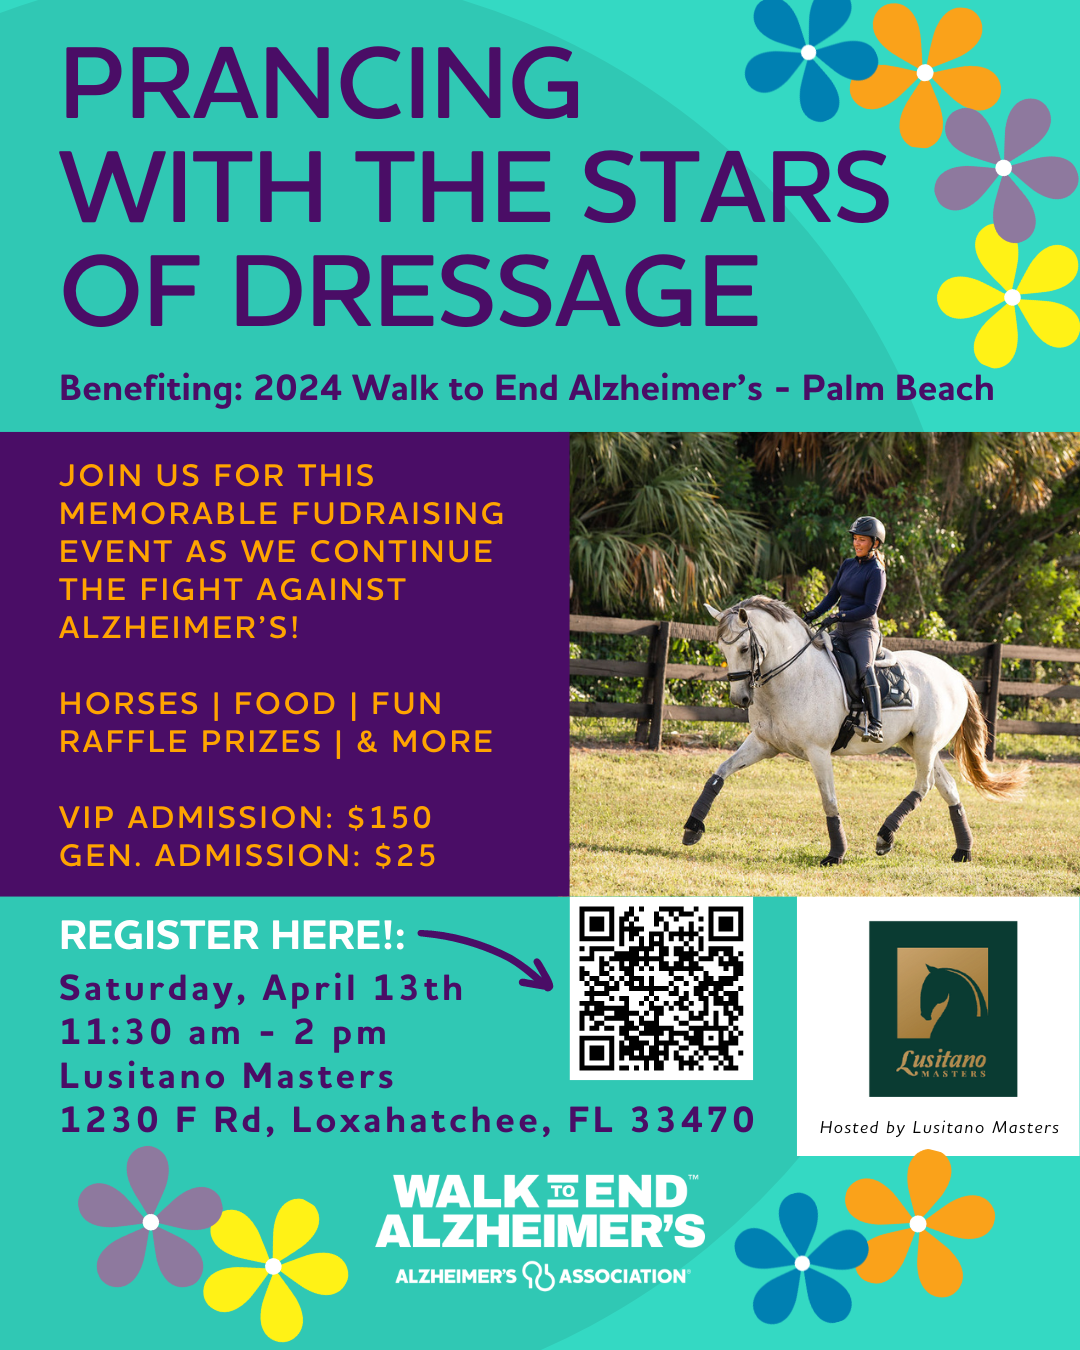 Prancing with the Stars of Dressage - Flyer (1).png